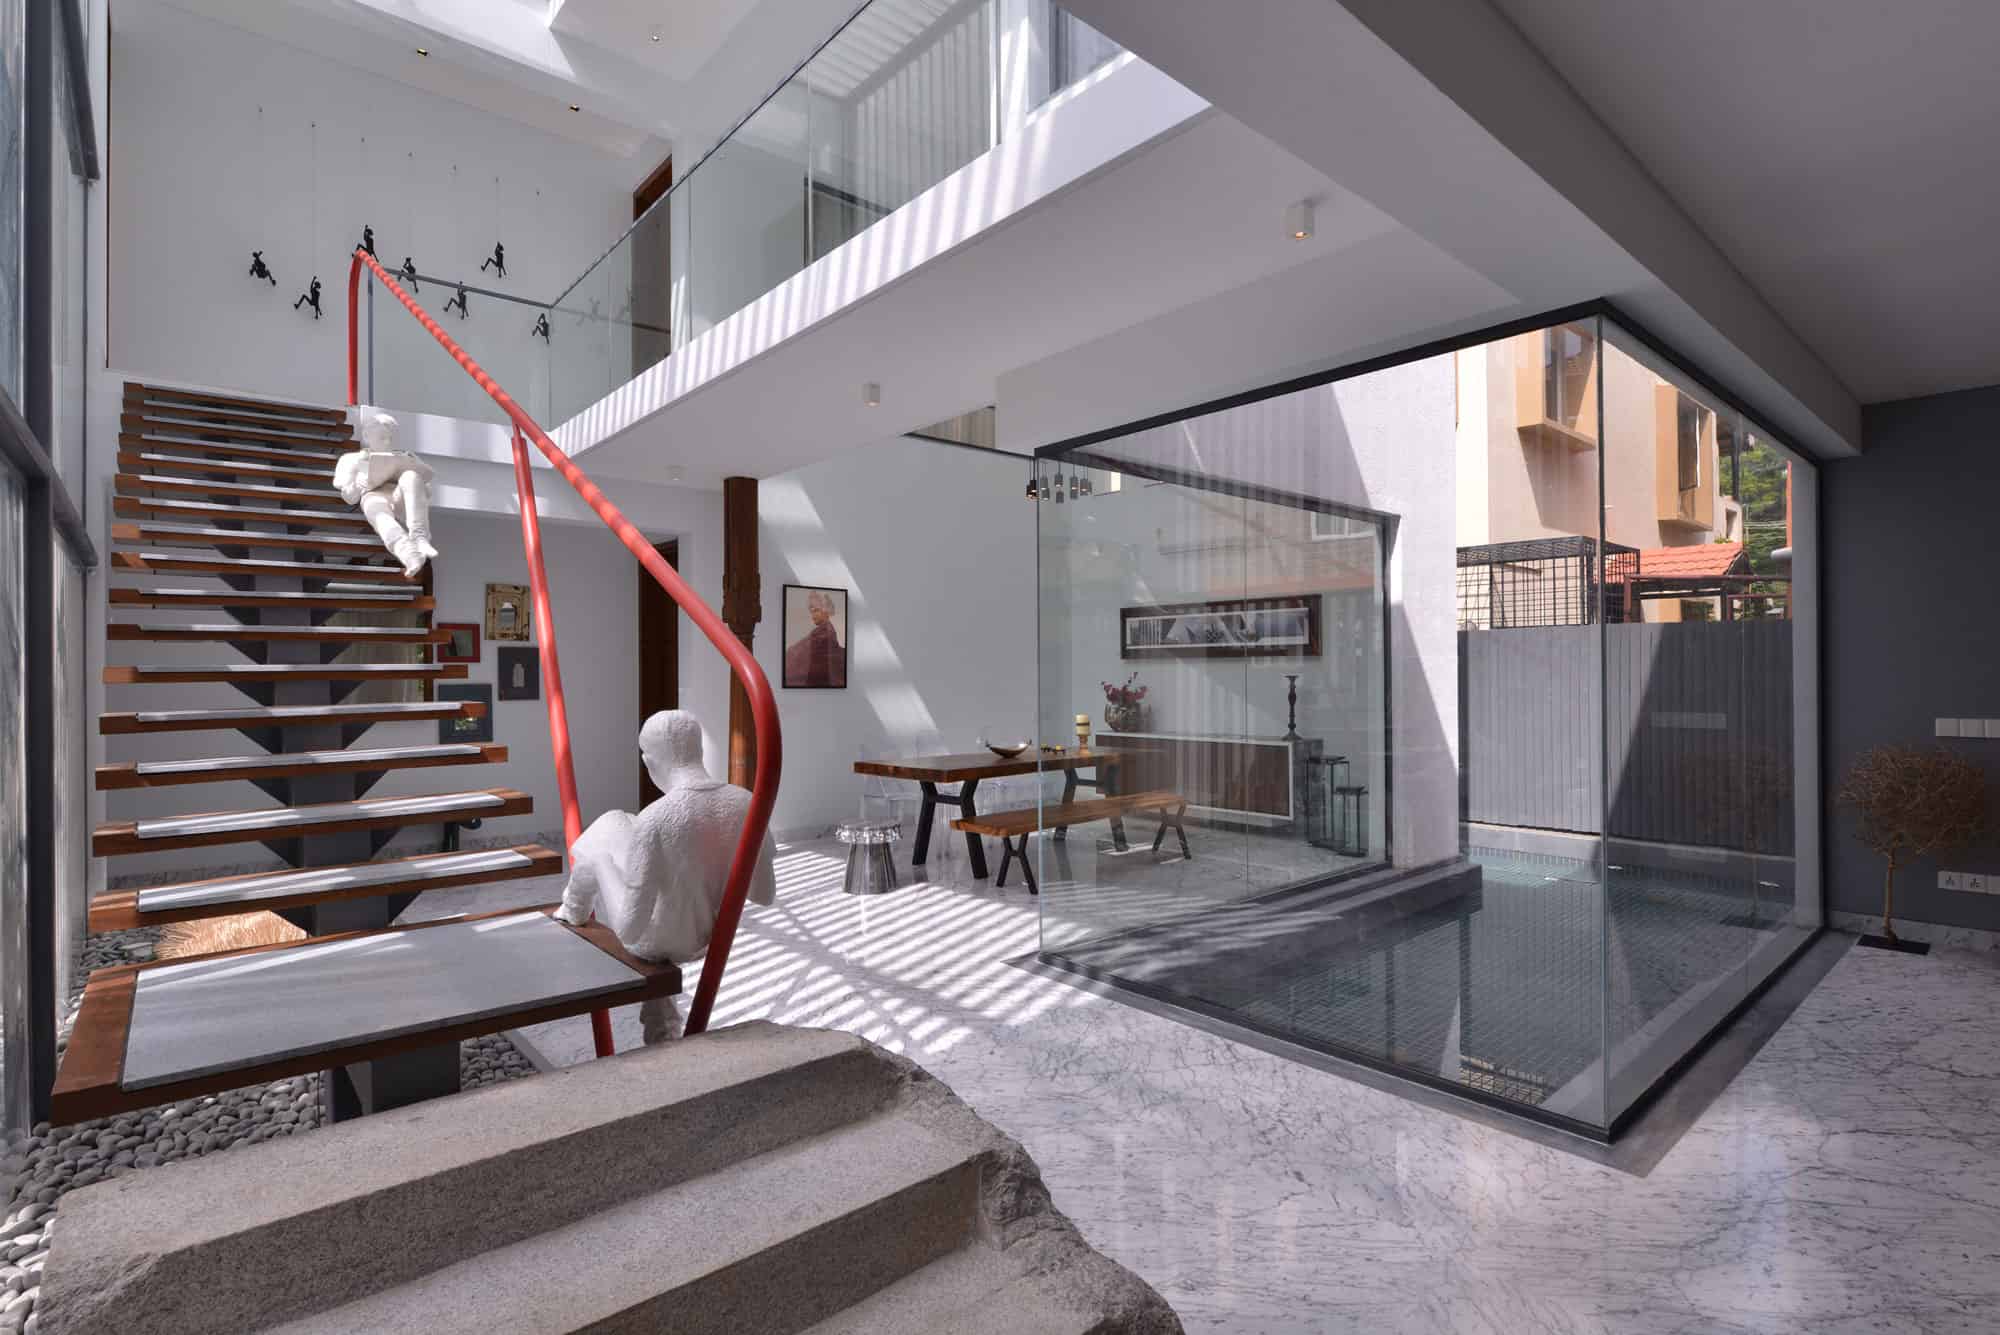 minimal yet modern stairs, connection to enchanting courtyard, sculpture, glass cabin, home decor